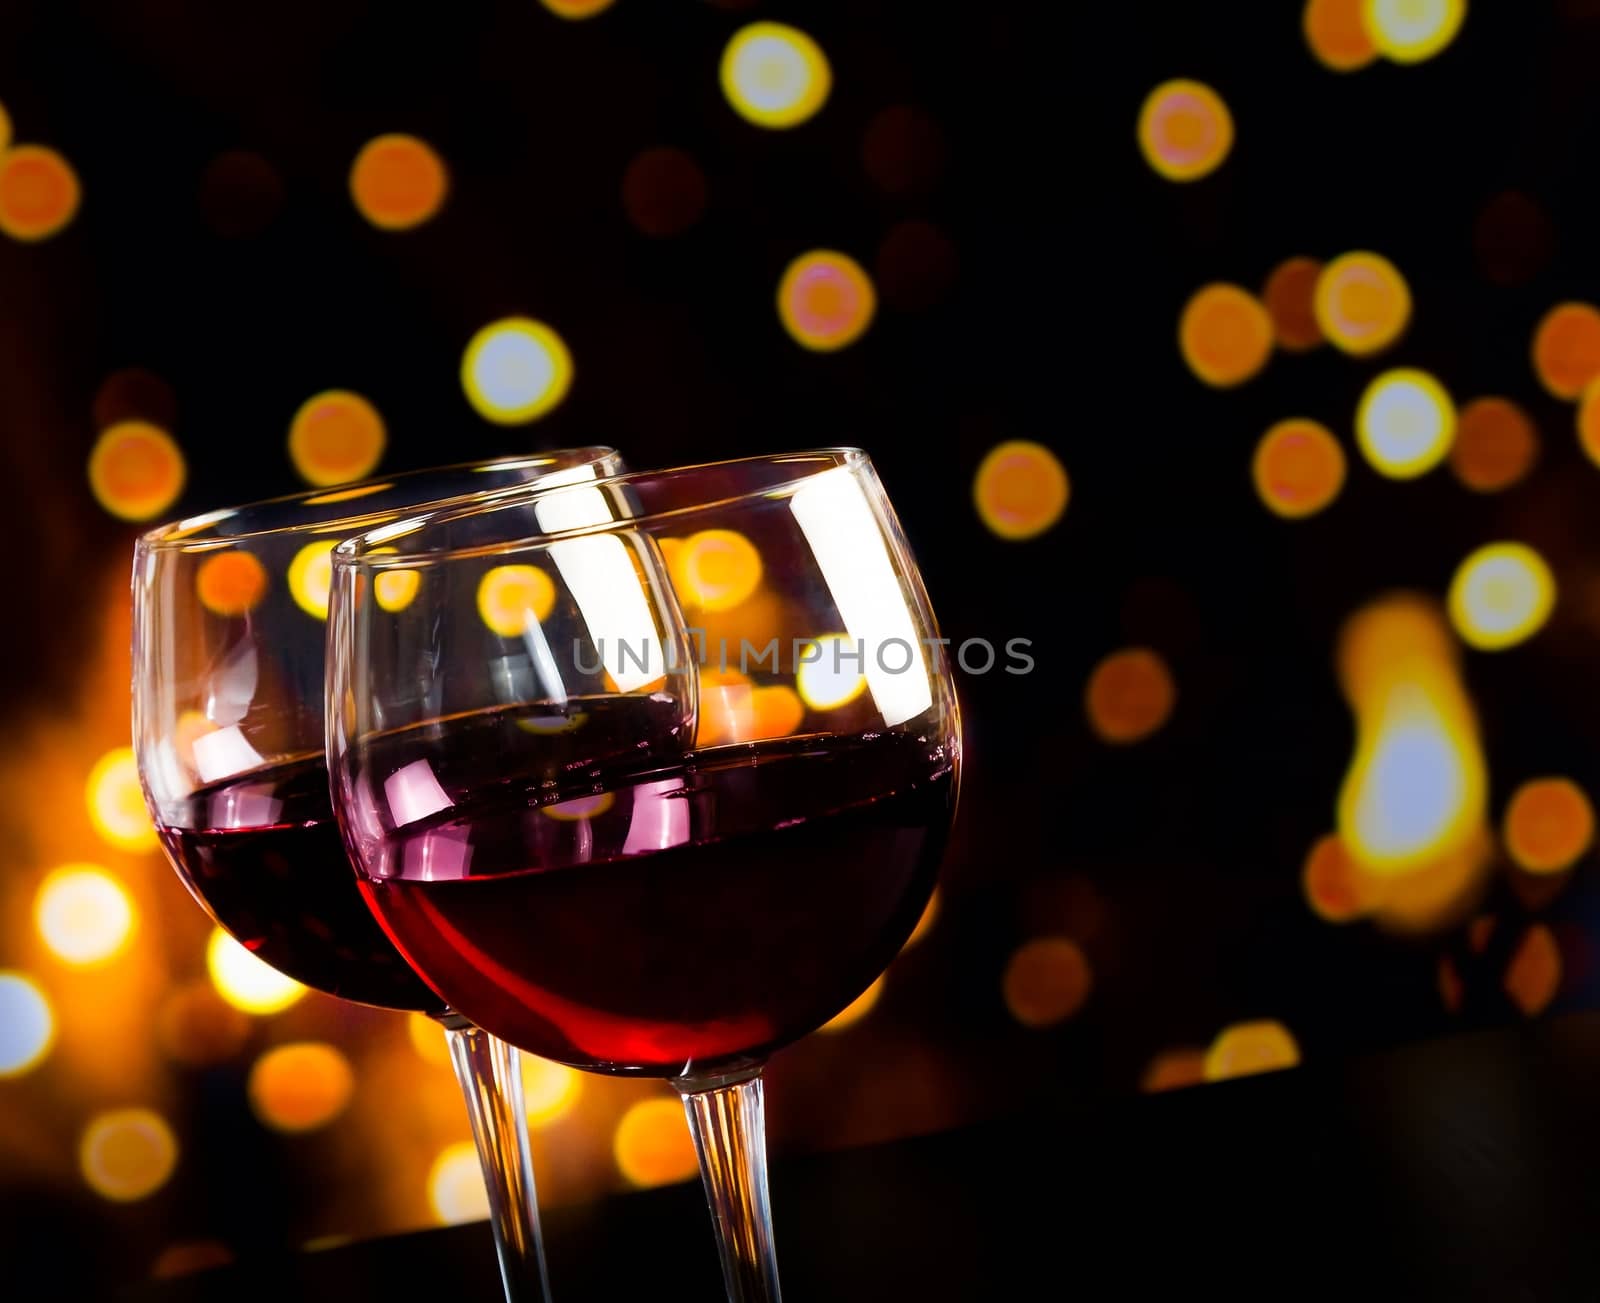 two red wine glasses on wood table against bokeh lights background by donfiore